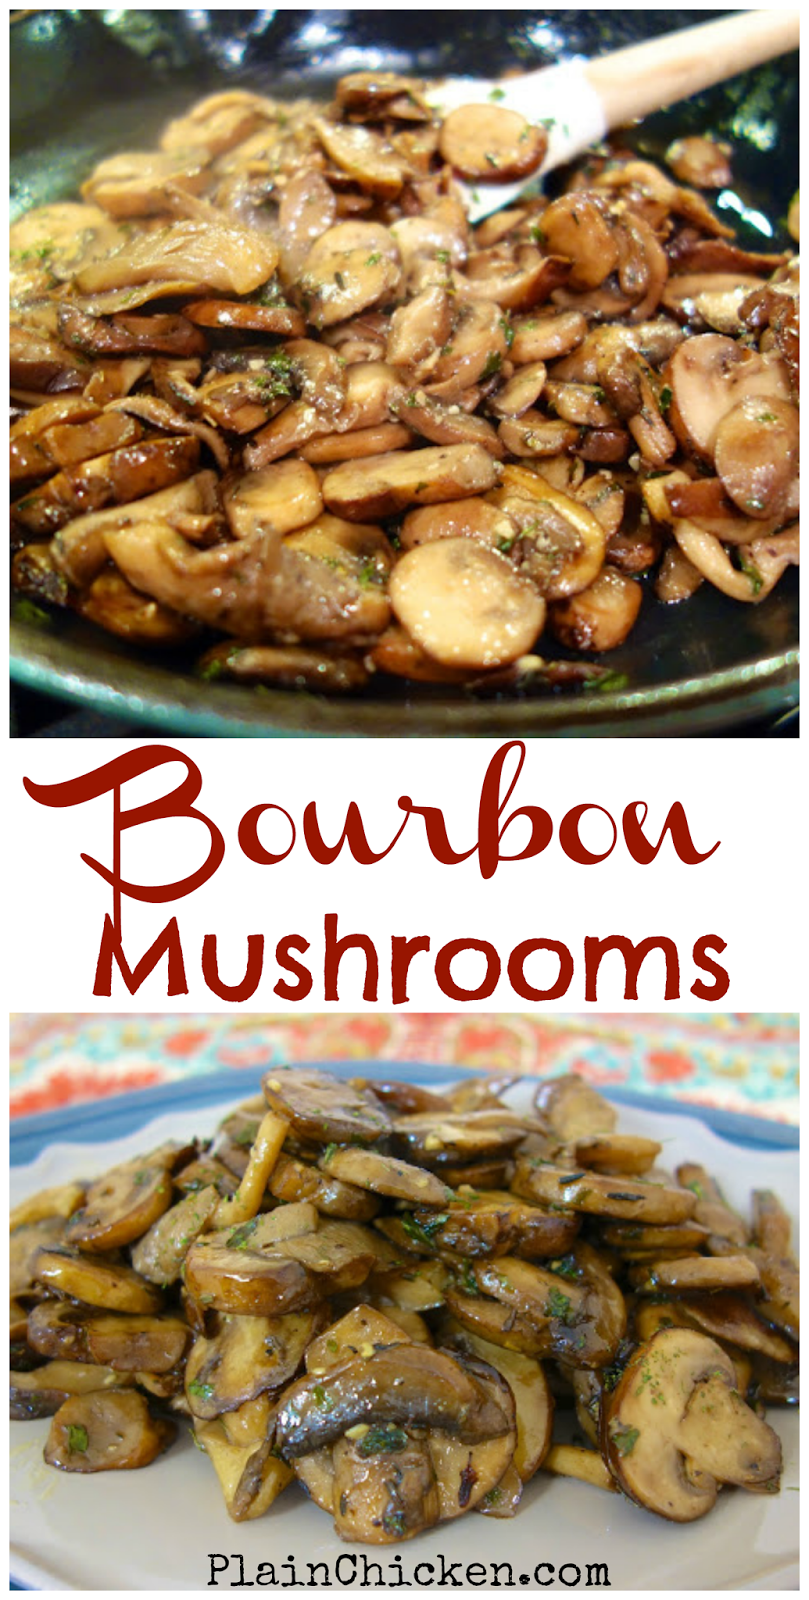 Bourbon Mushrooms - fresh mushrooms saut?ed in butter, bourbon, garlic, parsley and thyme. Ready in under 20 minutes! Great side dish for steaks, pork and chicken! -   23 fresh mushroom recipes
 ideas